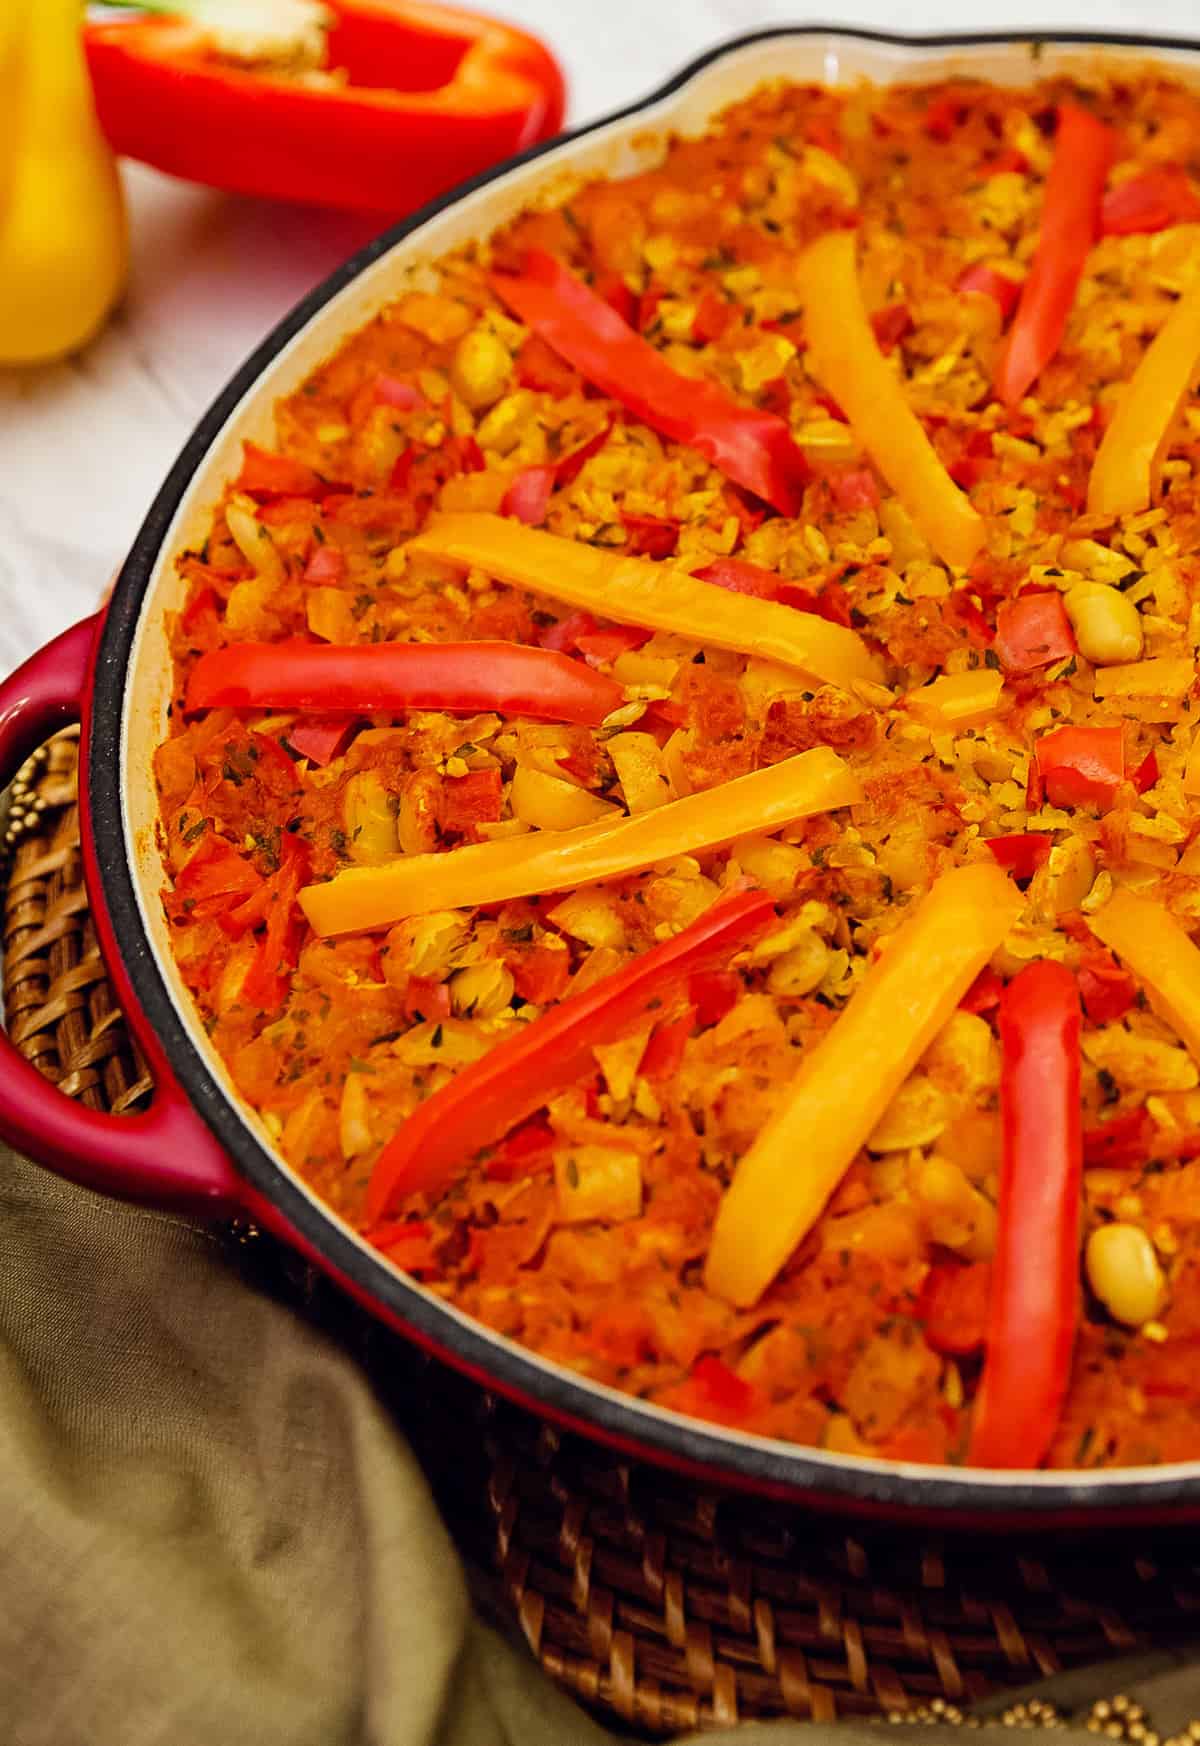 paella, vegan paella, vegetarian paella, whole food plant based paella, oil free paella, gluten free paella, paella recipe, recipe, vegan, vegetarian, whole food plant based, gluten free, oil free, dairy free, wfpb, dinner, lunch, rice, brown rice, peppers, beans, easy, simple, healthy, side, side dish,